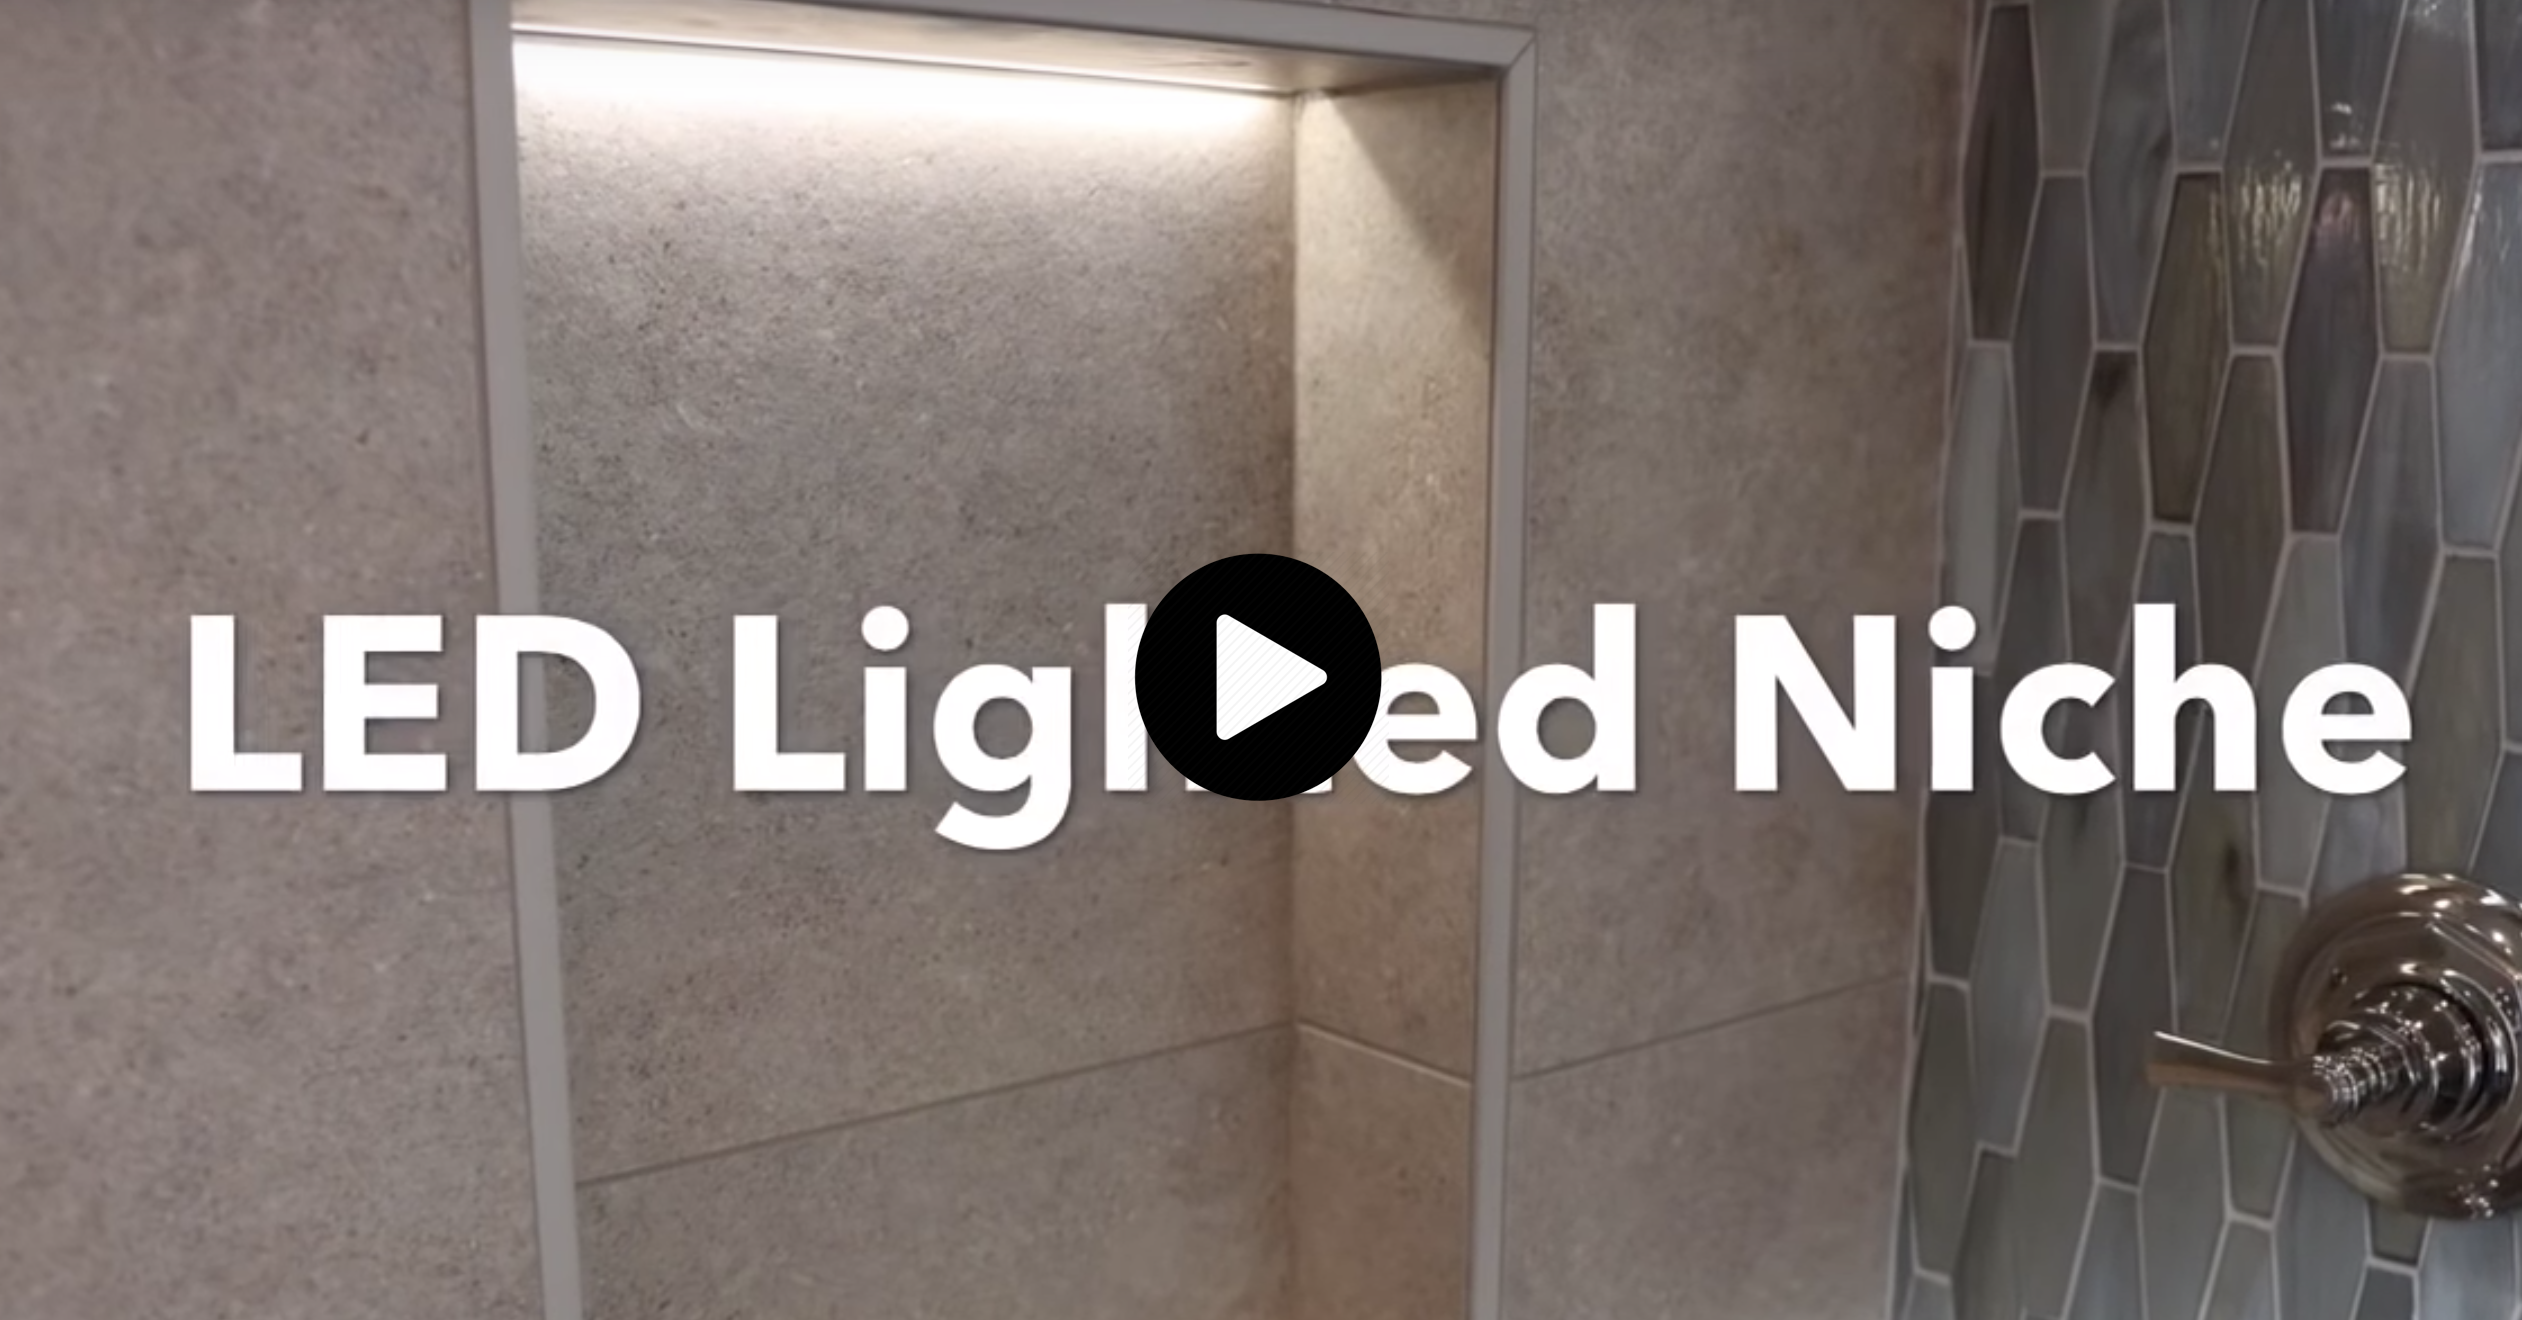 How to Make a Lighted LED Shower Niche | Residential Products Online